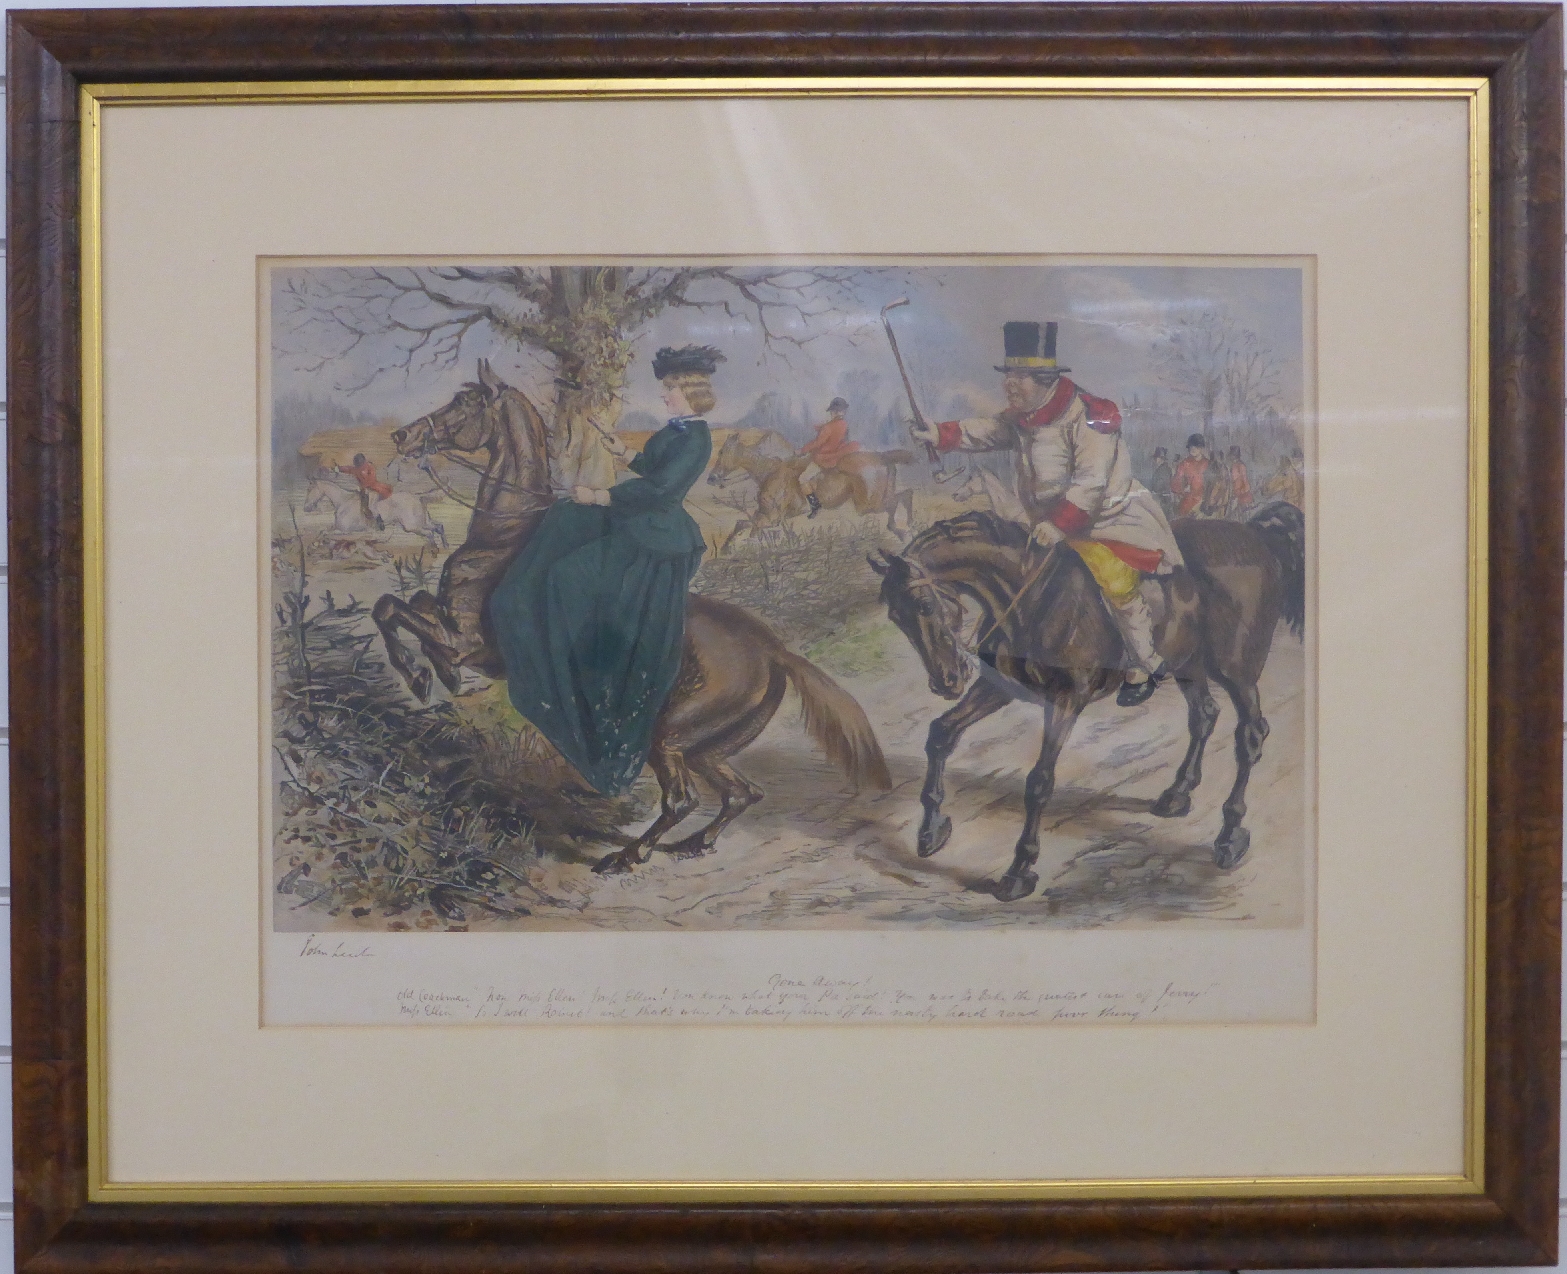 Four 19thC John Leach hunting/horse riding prints, each approximately 47 x 64cm - Image 5 of 15